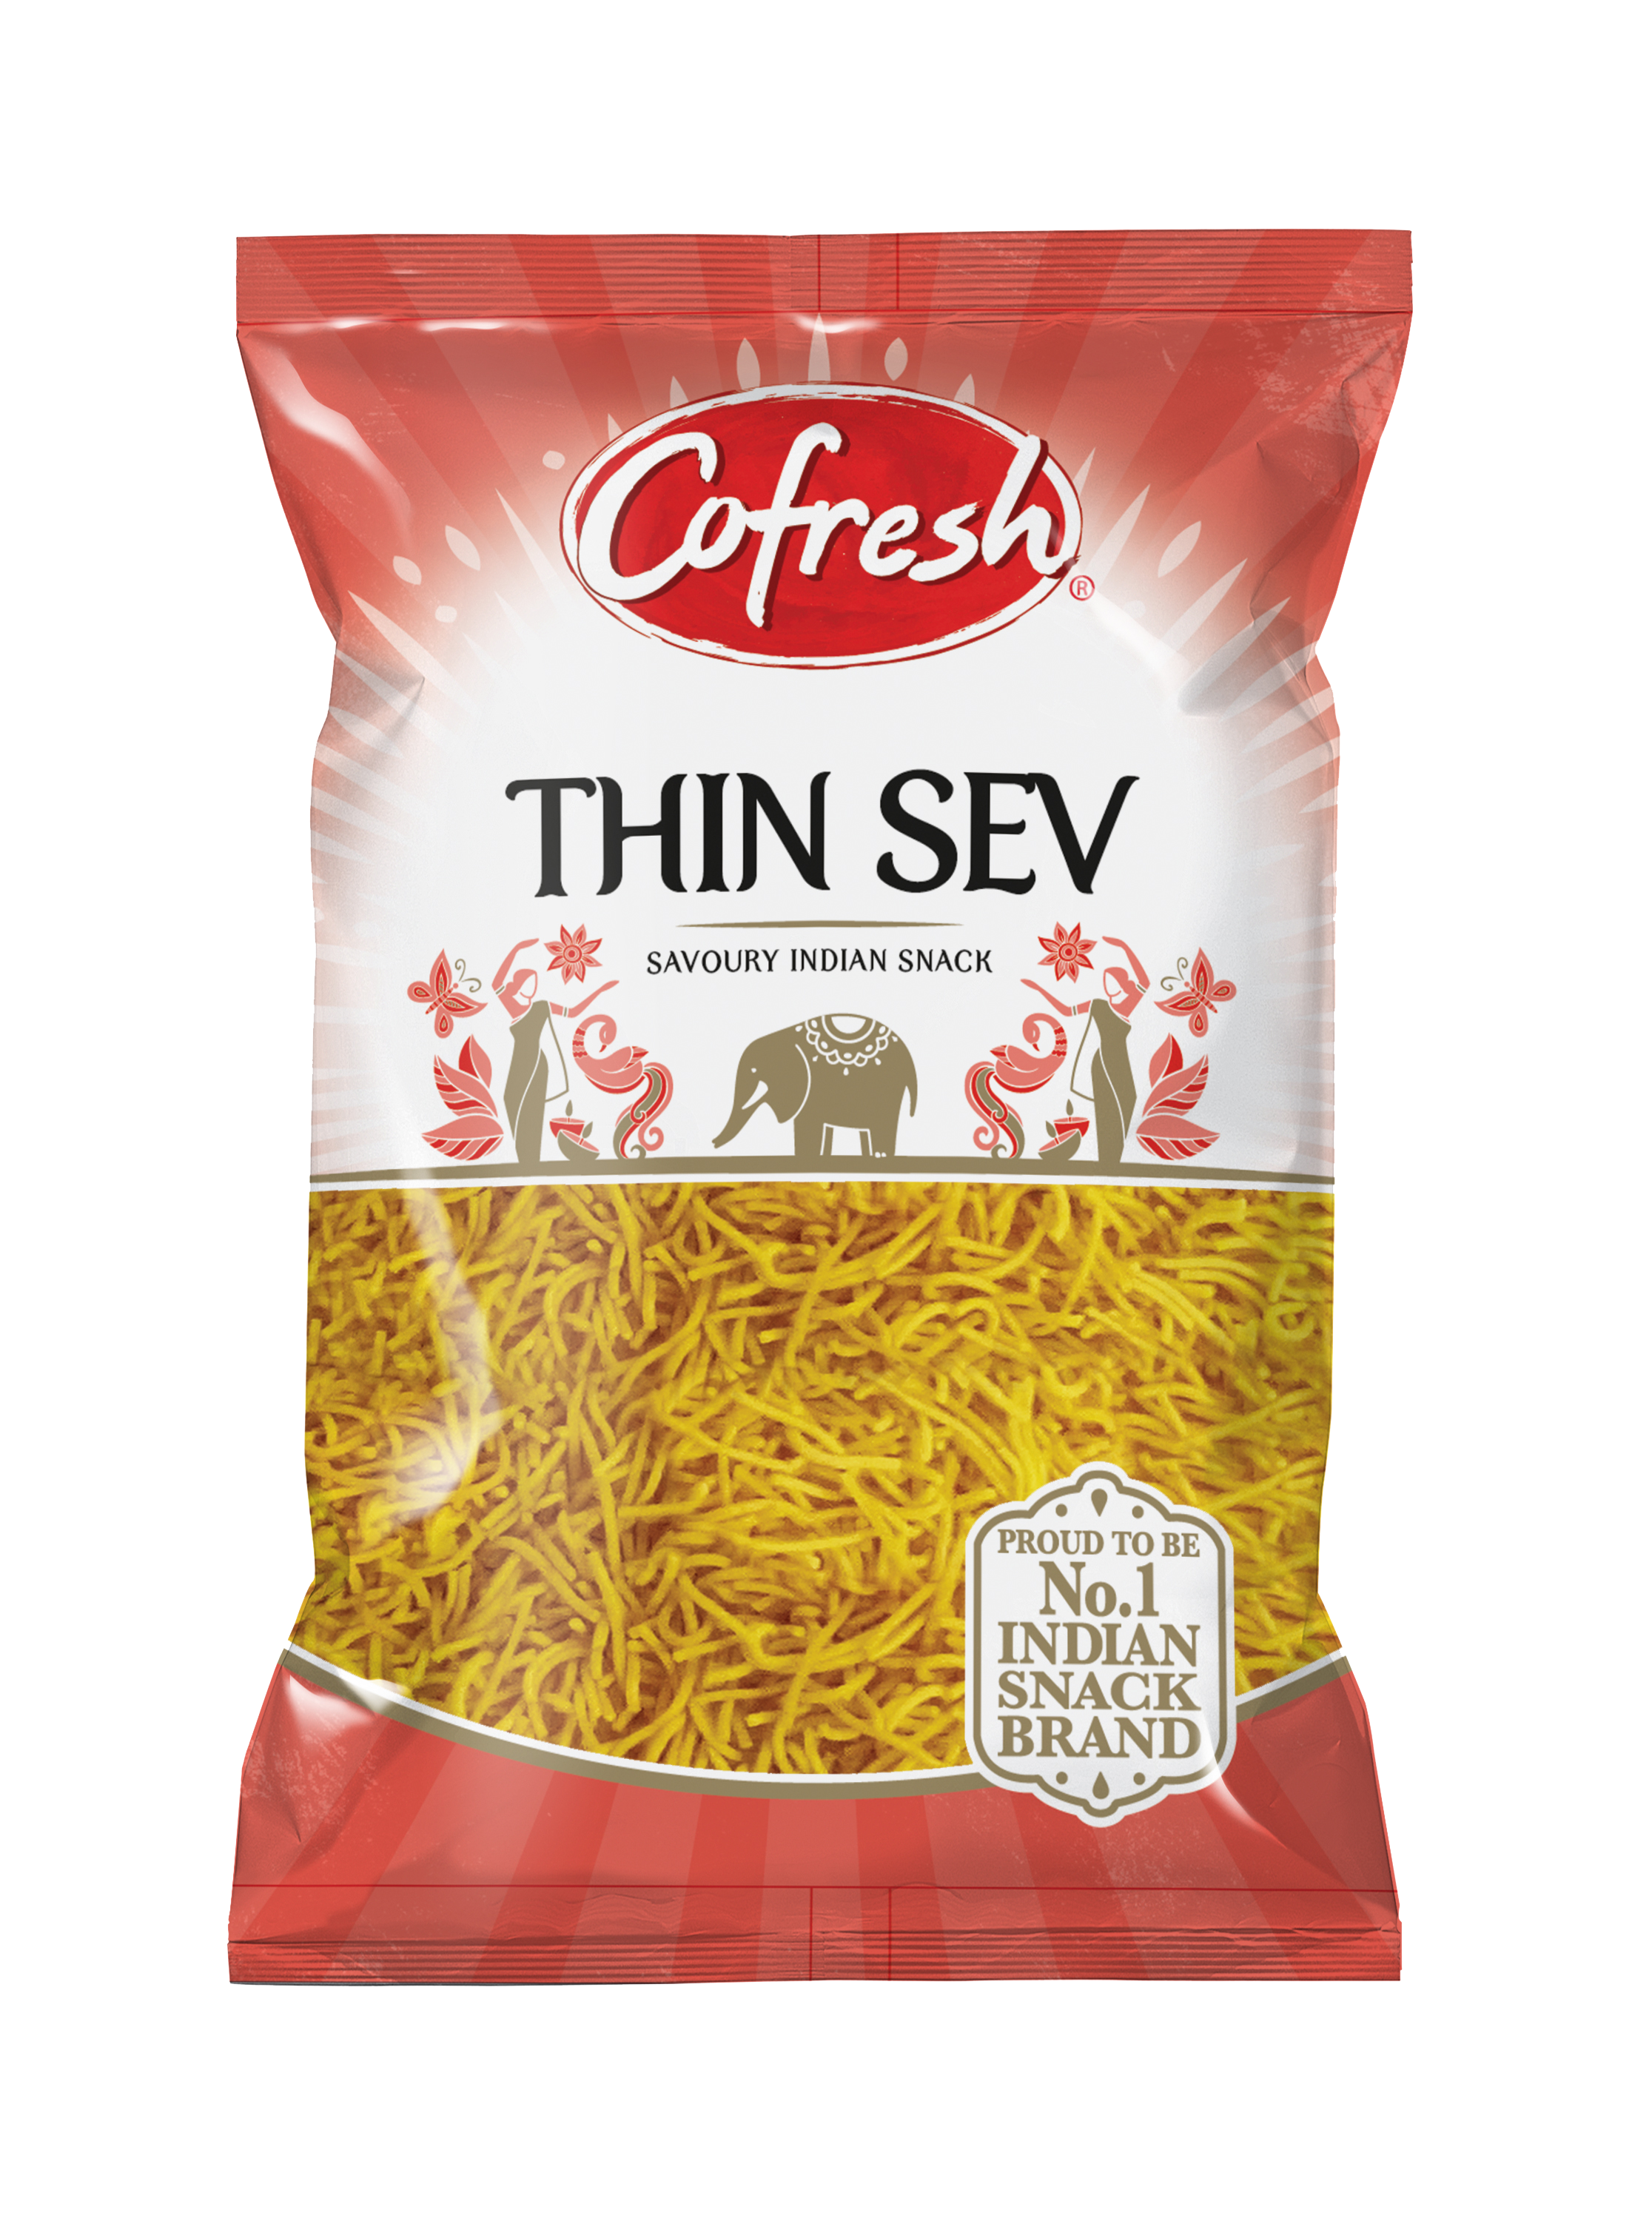 Cofresh launches Thin Sev as a stand-alone snack success